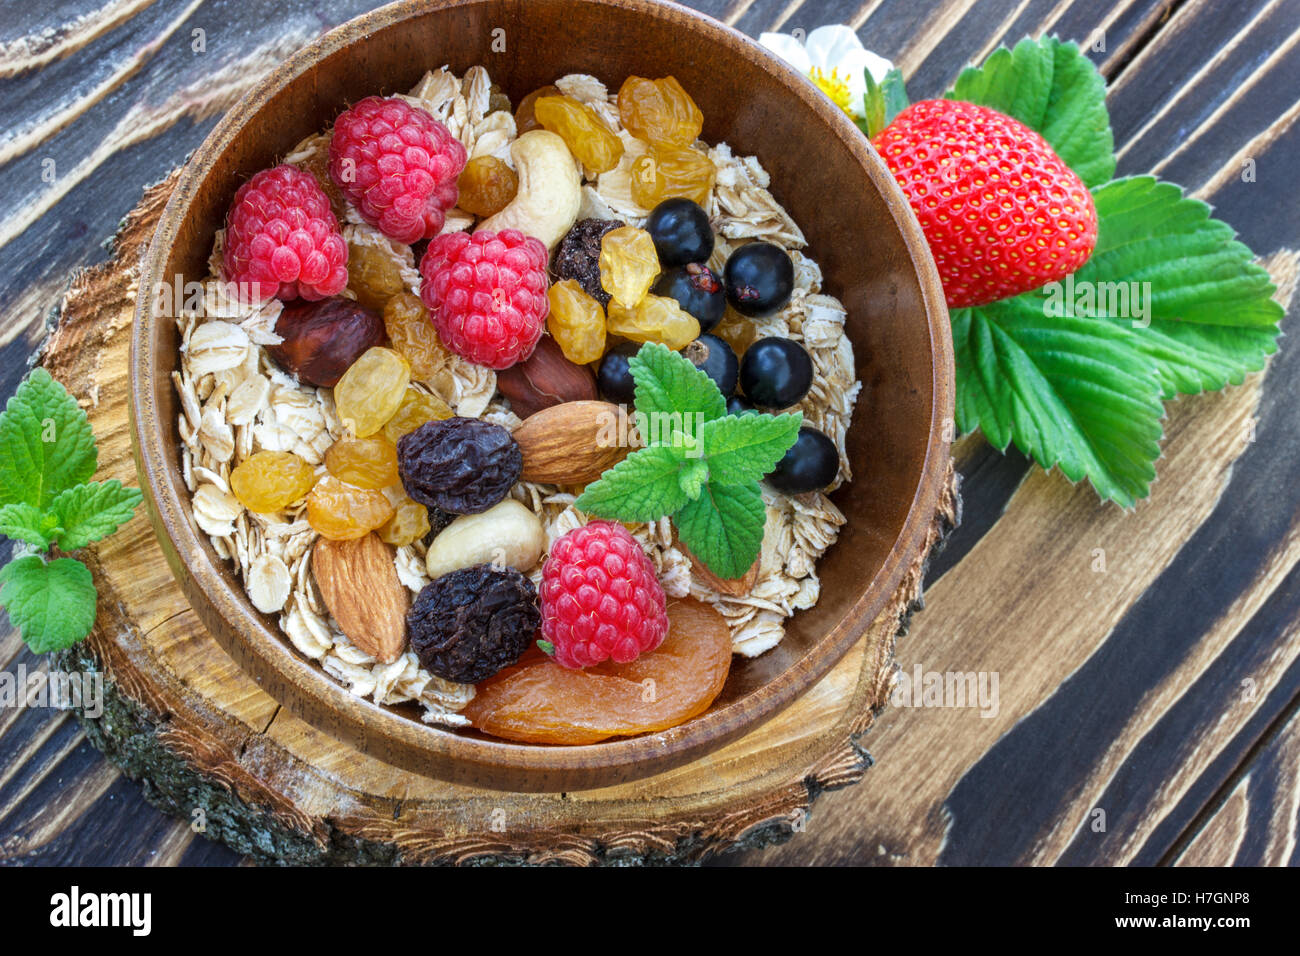 muesli and fresh berries, raisins and nutson a wooden table Stock Photo